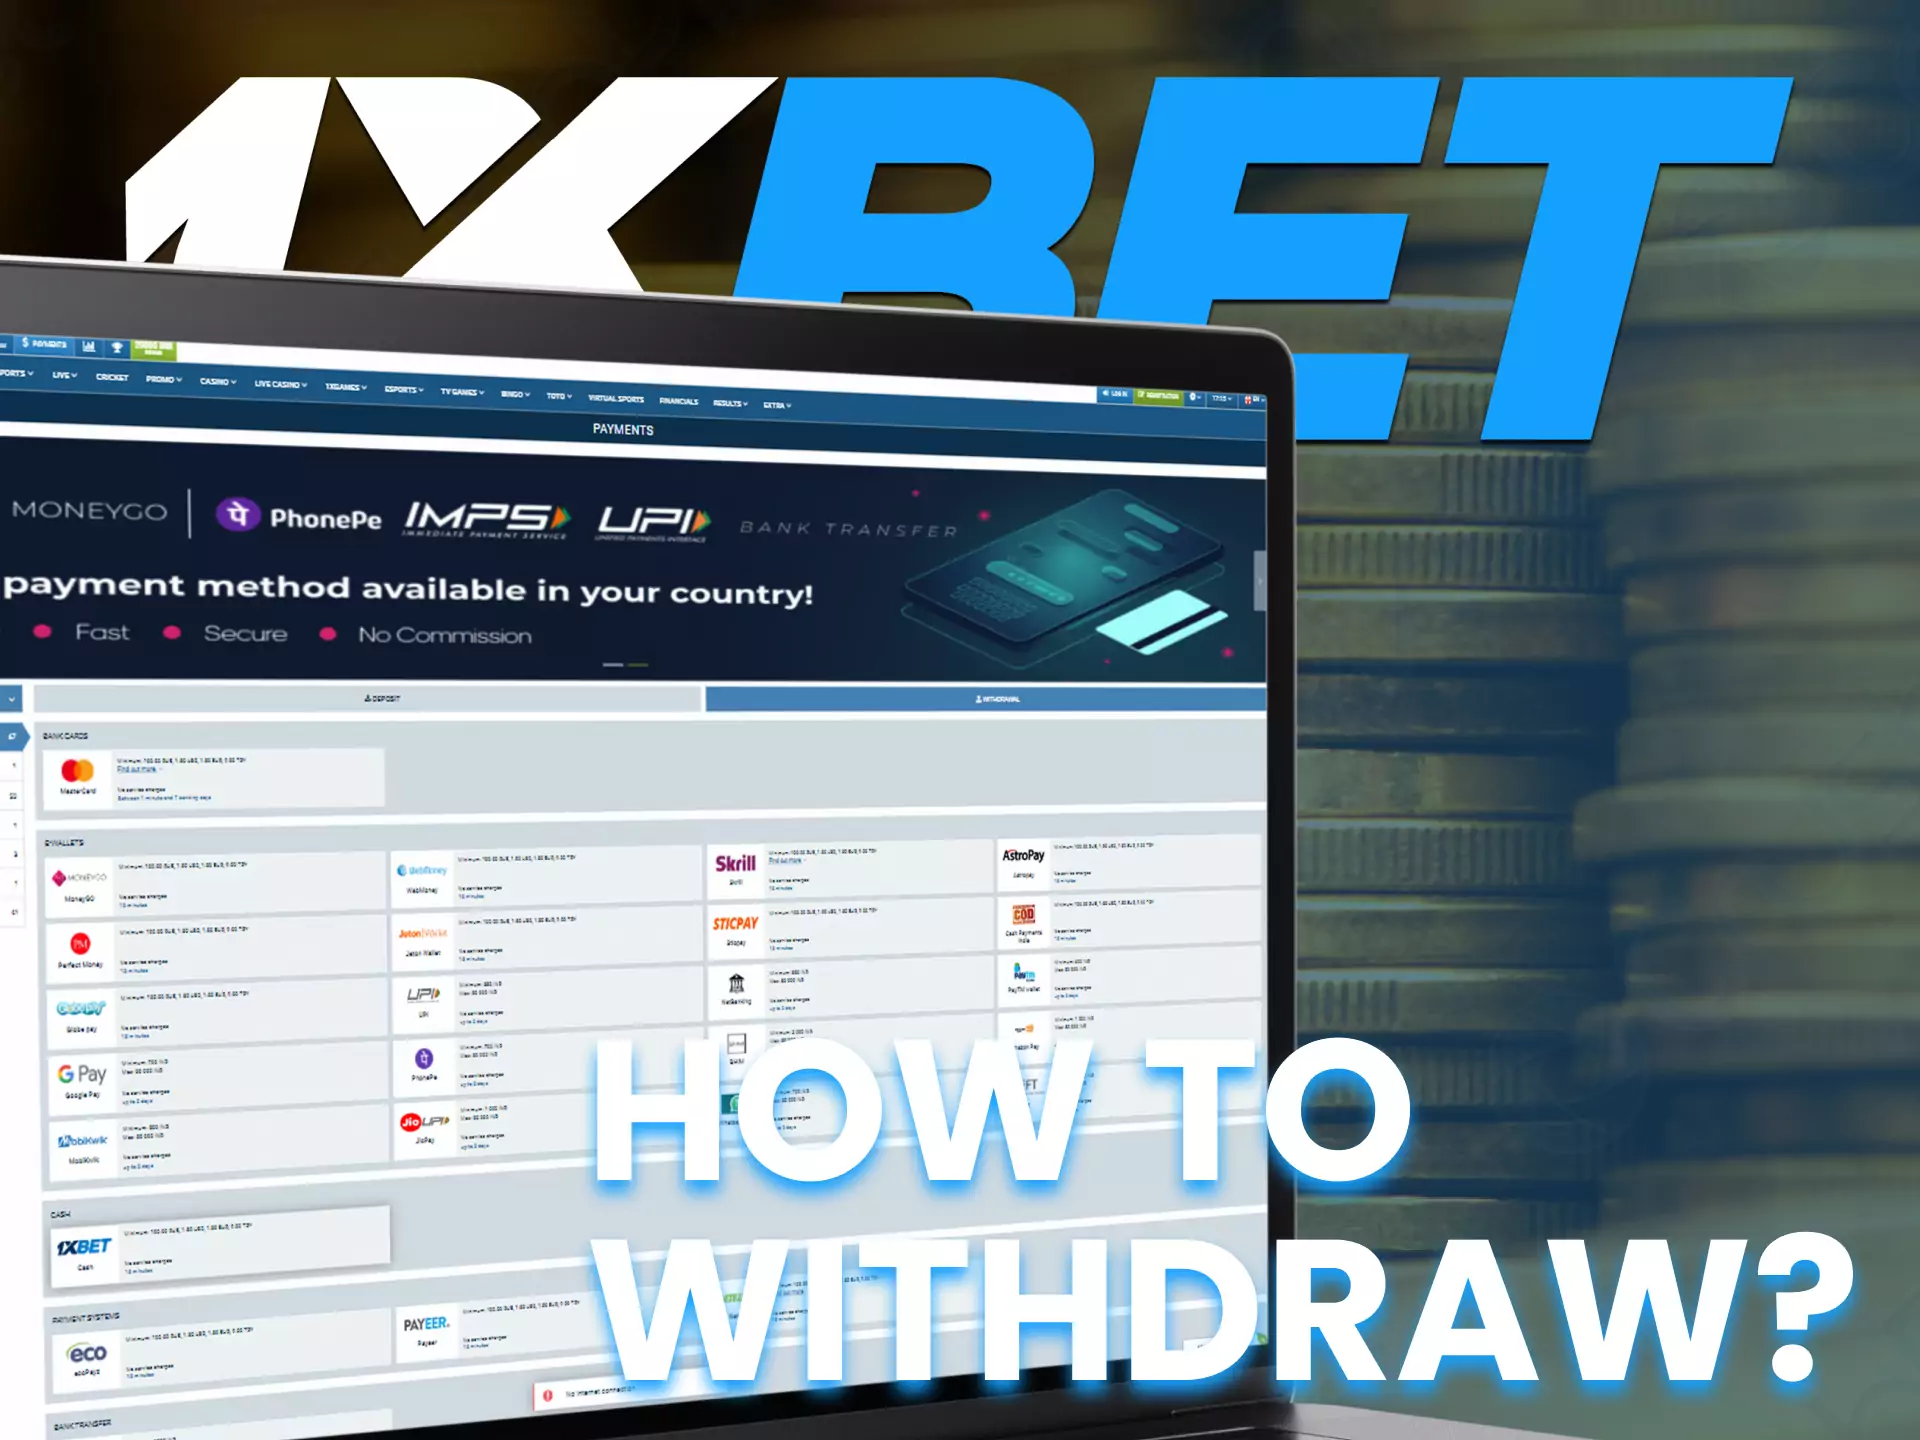 At 1XBET you can always easily withdraw your winnings.